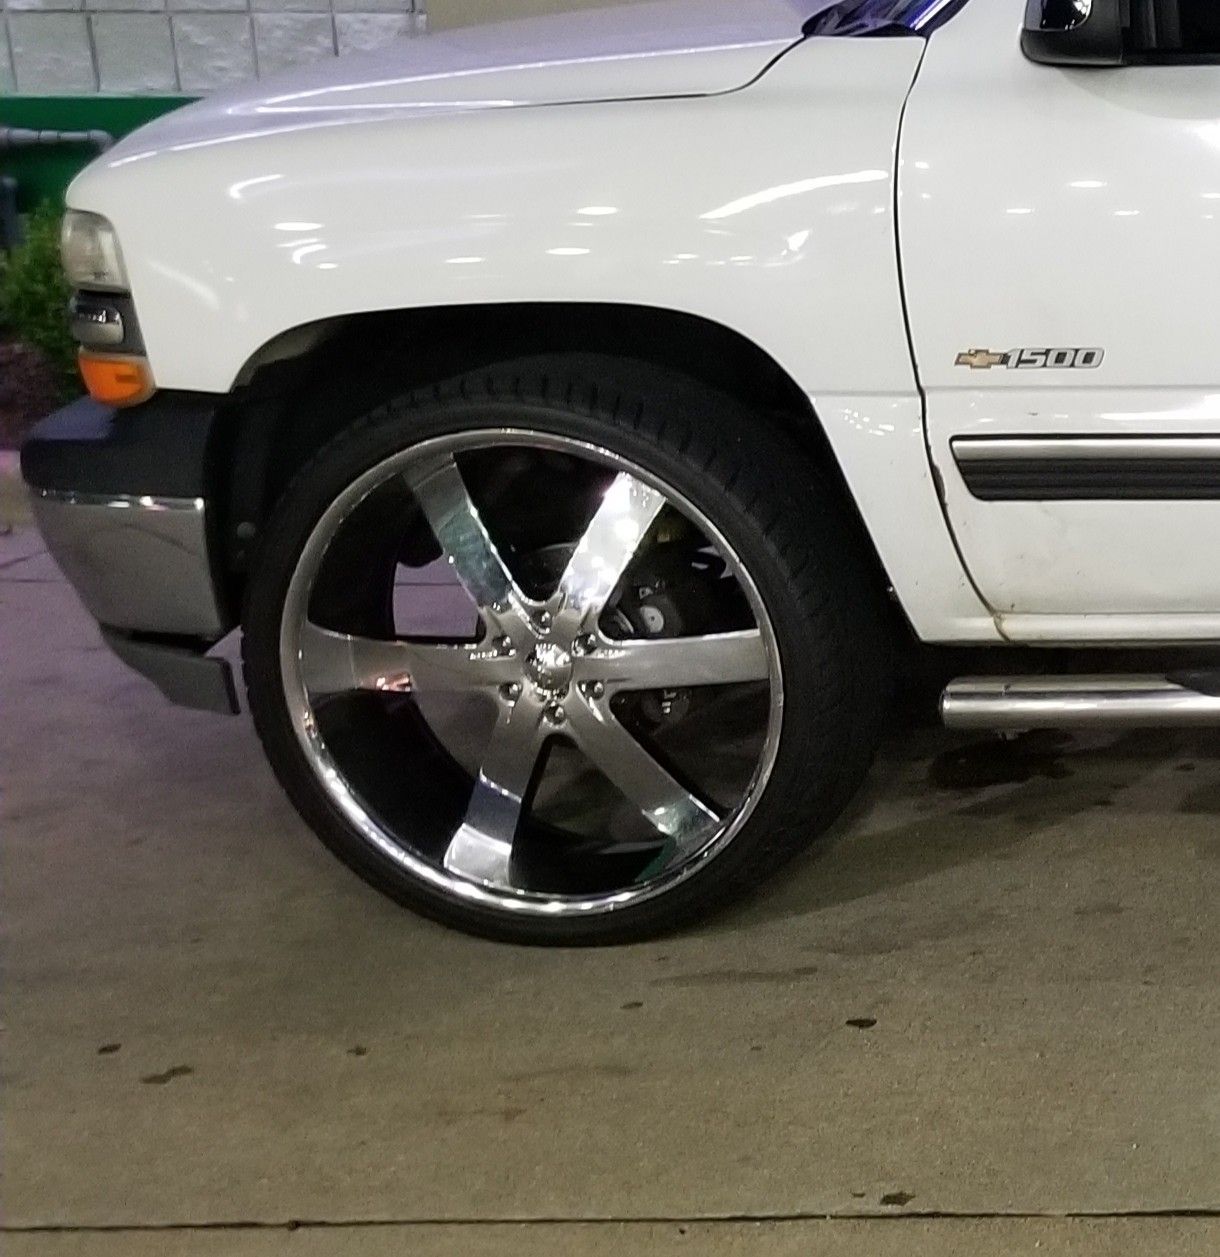 26"s 6 lug rims and tires